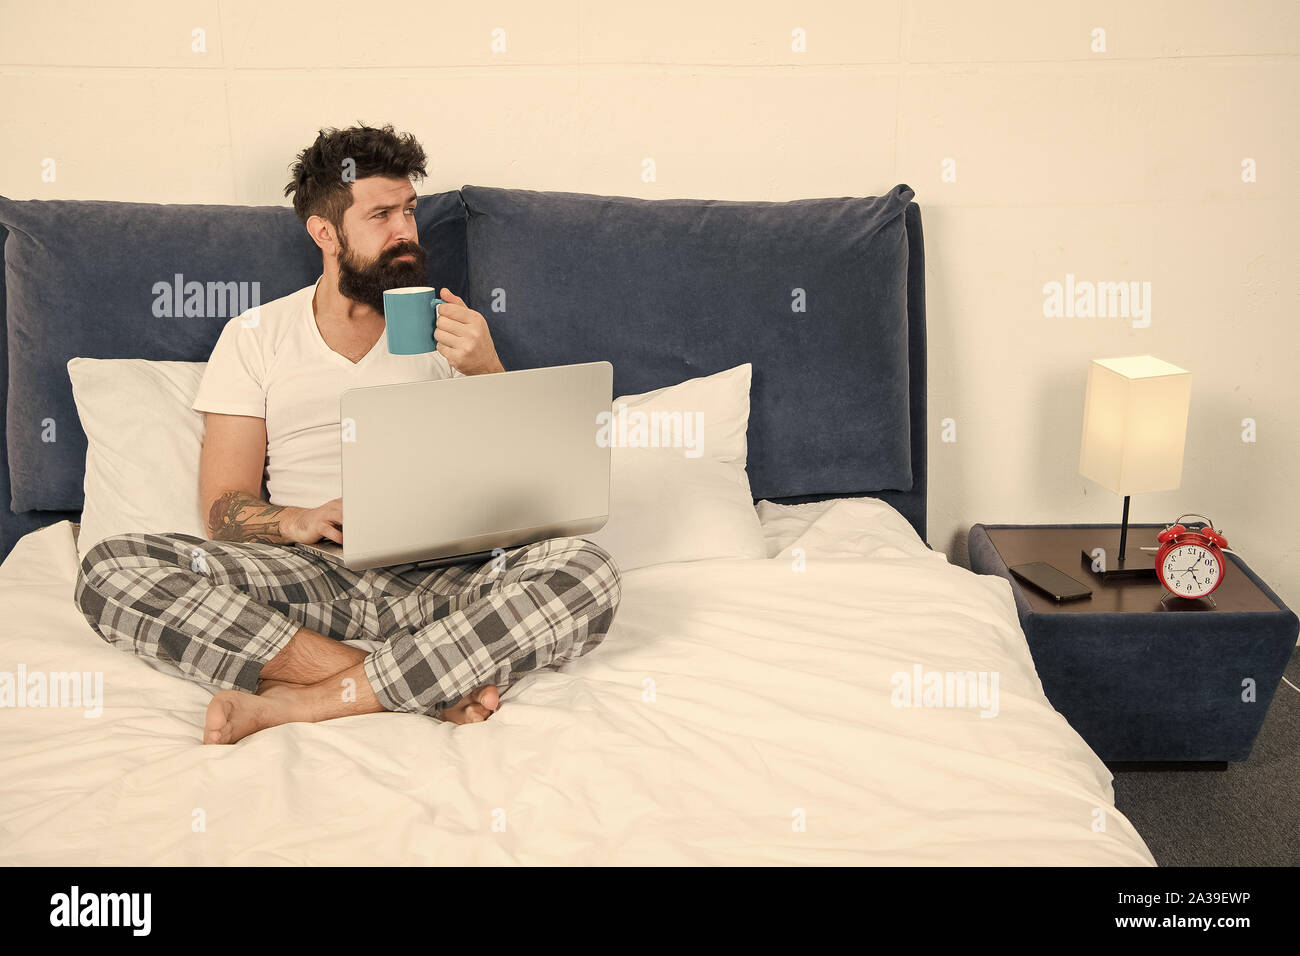 Hipster bearded guy pajamas freelance worker. Remote work concept. Social networks internet addiction. Online shopping. Man surfing internet or work online. Just woke up and already at work. Stock Photo